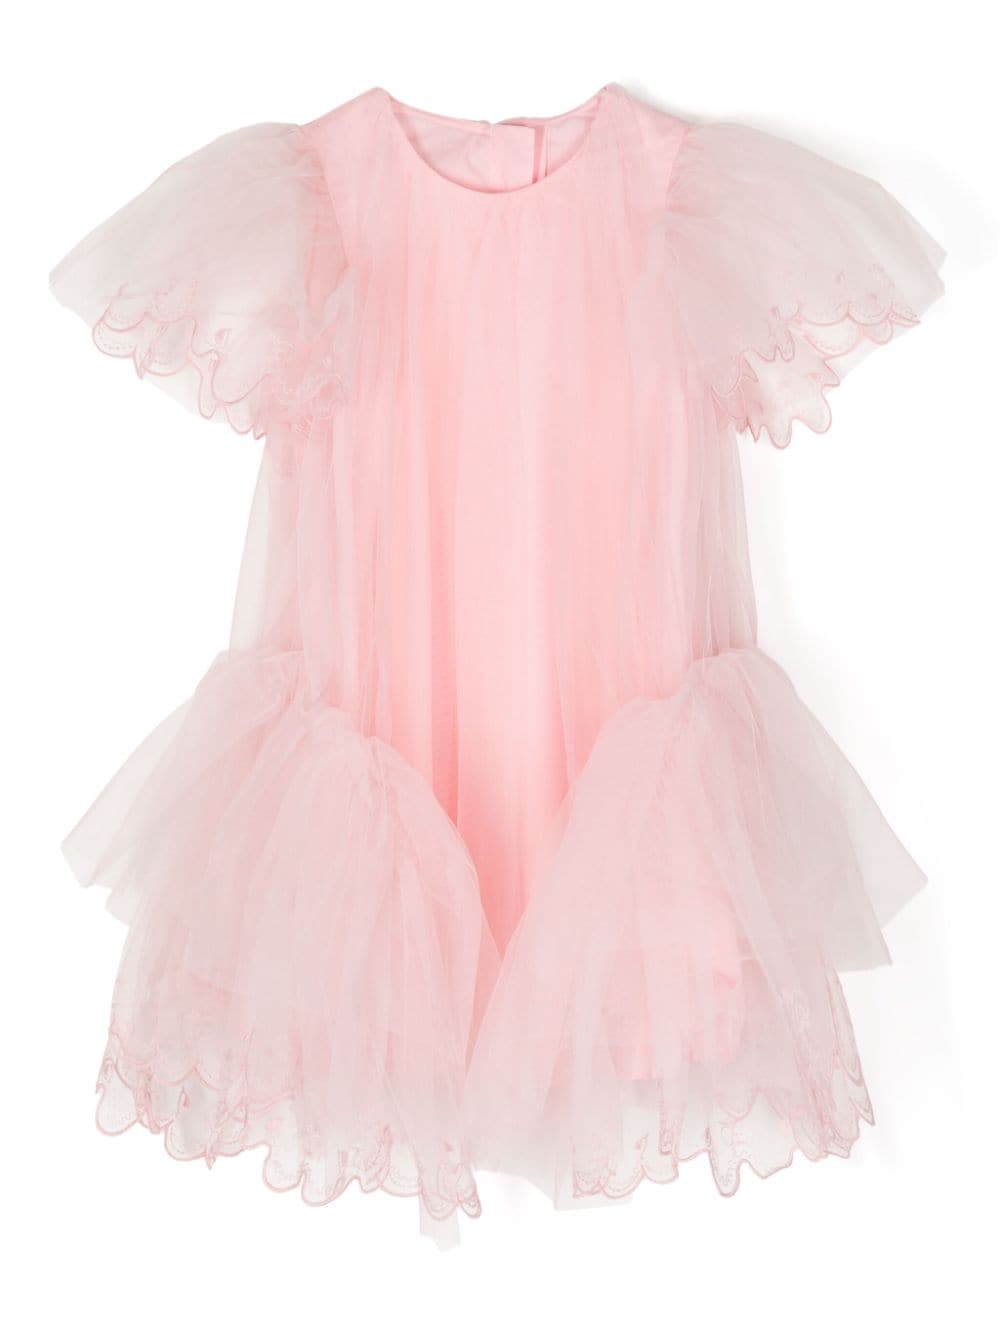 jnby by JNBY lace-trimmed tulle dress - Rosa von jnby by JNBY